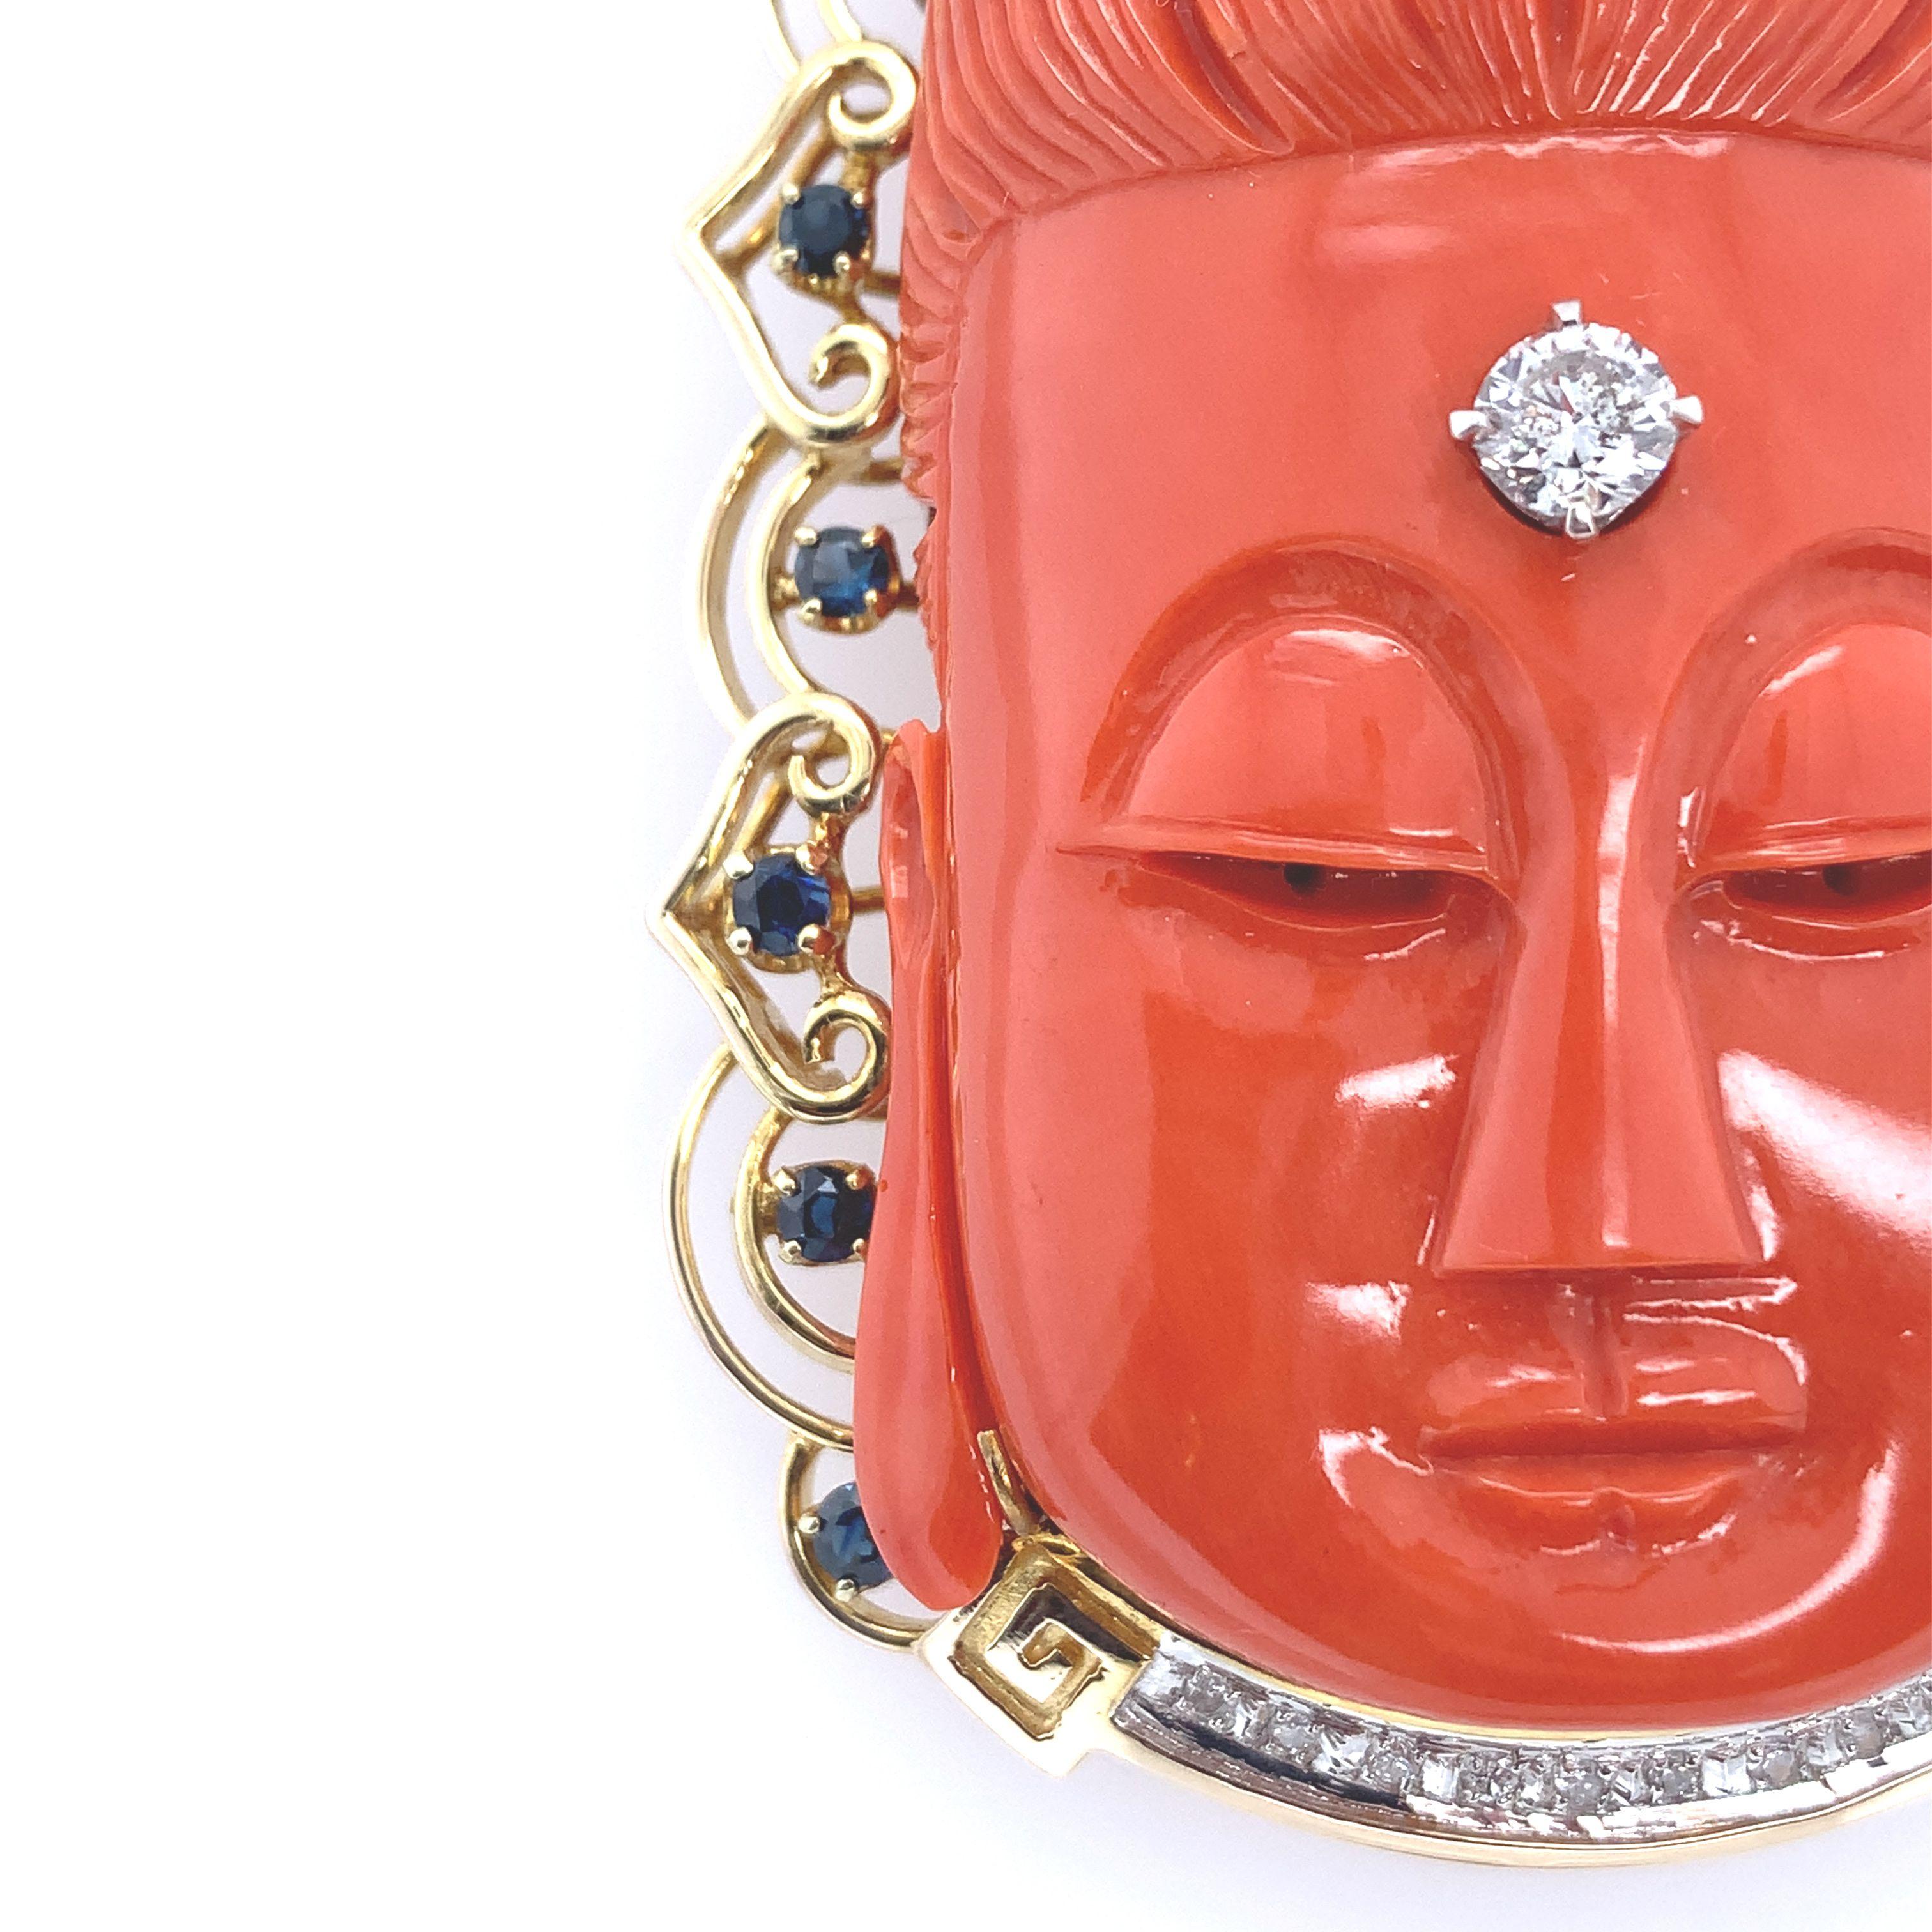 Magnificent large vintage Buddha pendant brooch set in 14K yellow gold. This intricate brooch features Buddha carved in natural red coral embraced by a decorative gold design featuring single-cut blue sapphires and diamonds. 

The coral carving